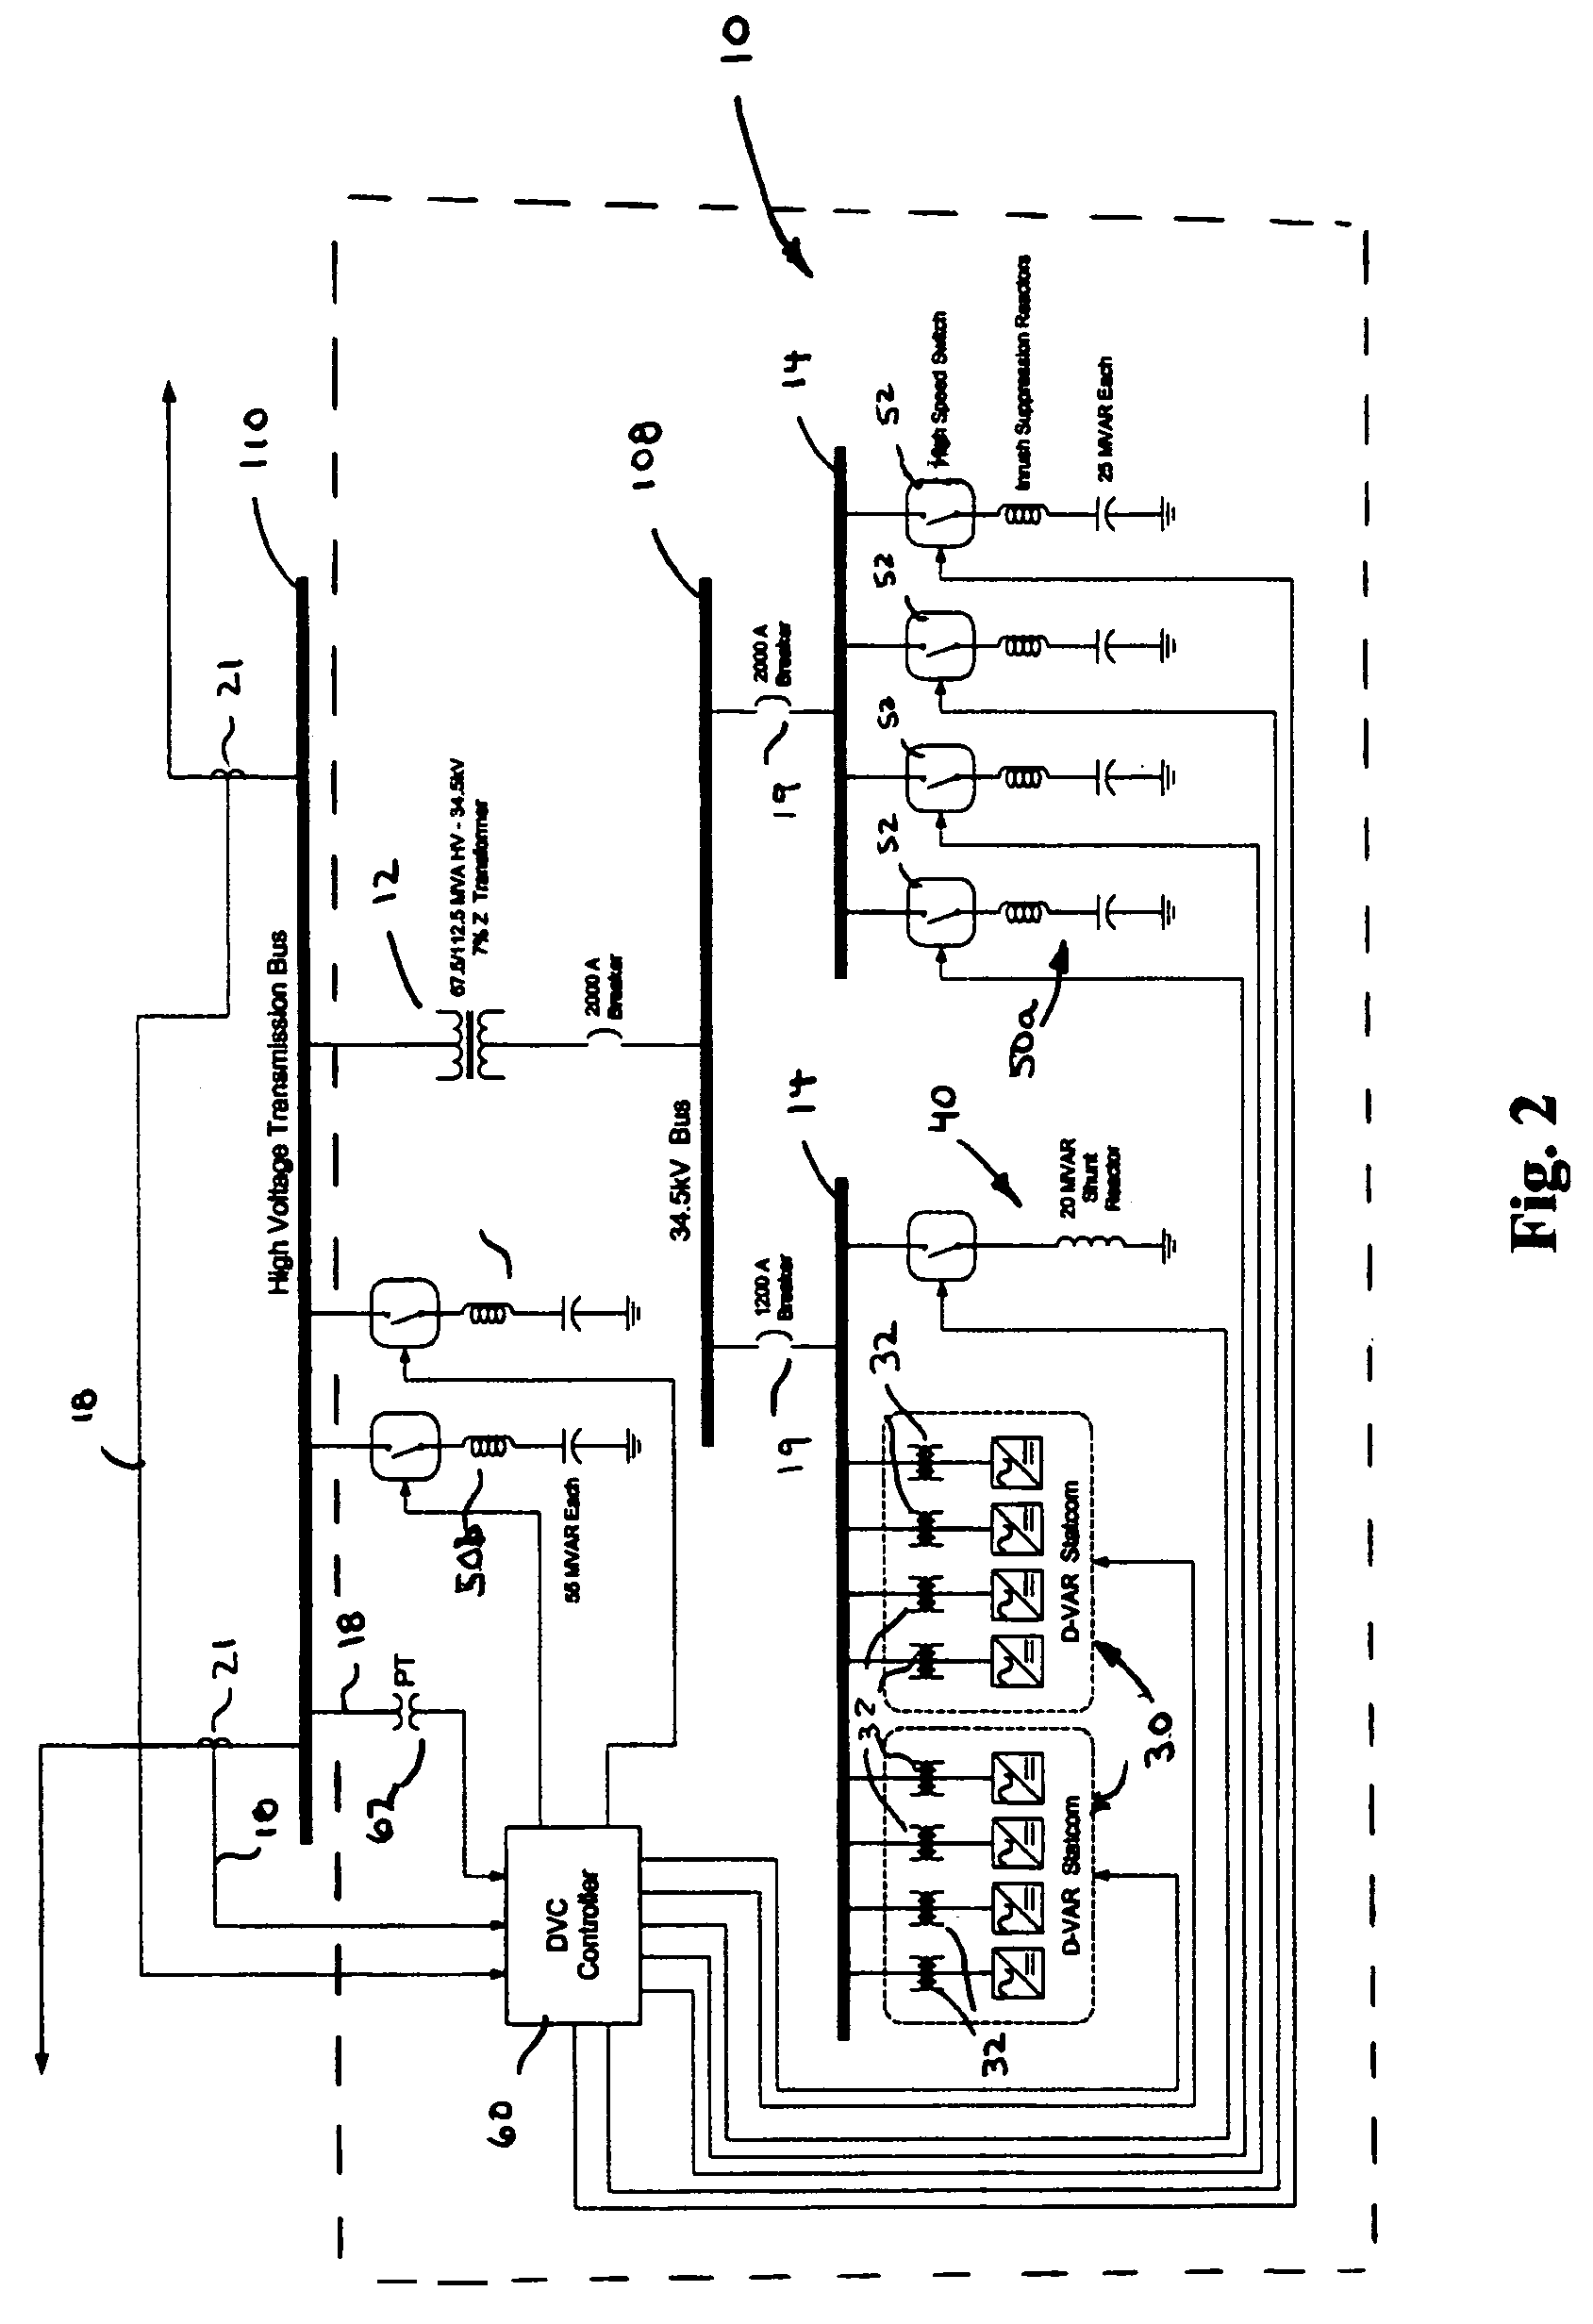 Dynamic reactive compensation system and method